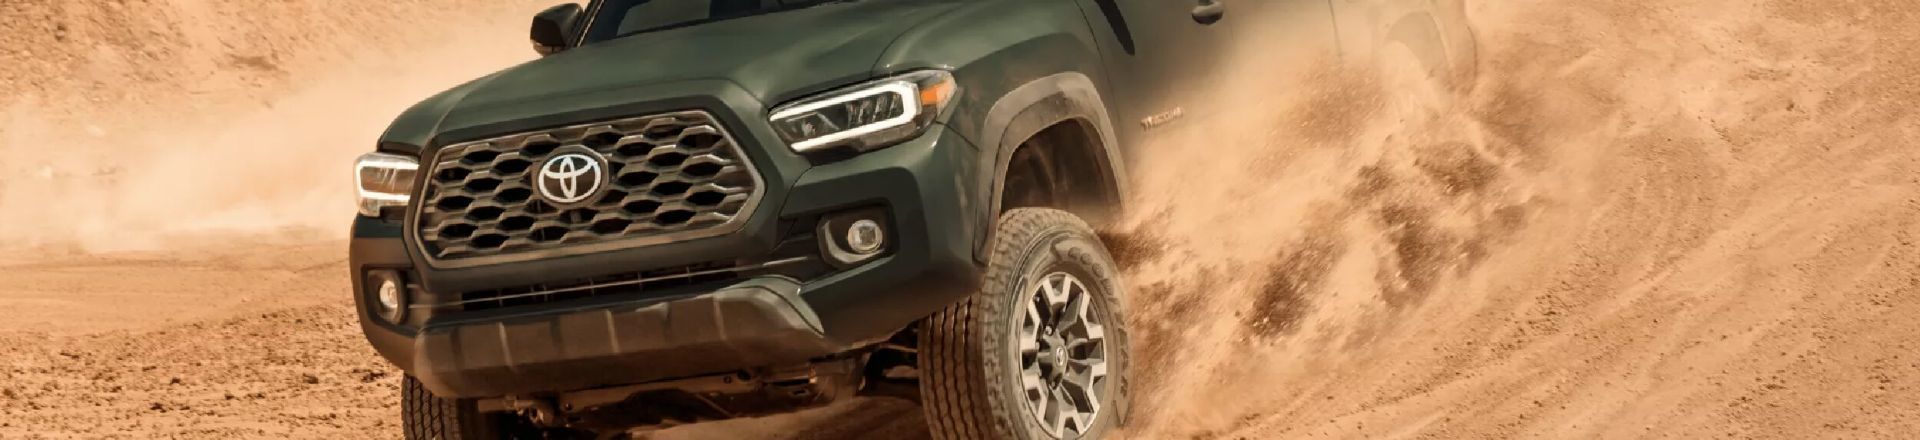 Buying A Used Toyota Tacoma In Ontario